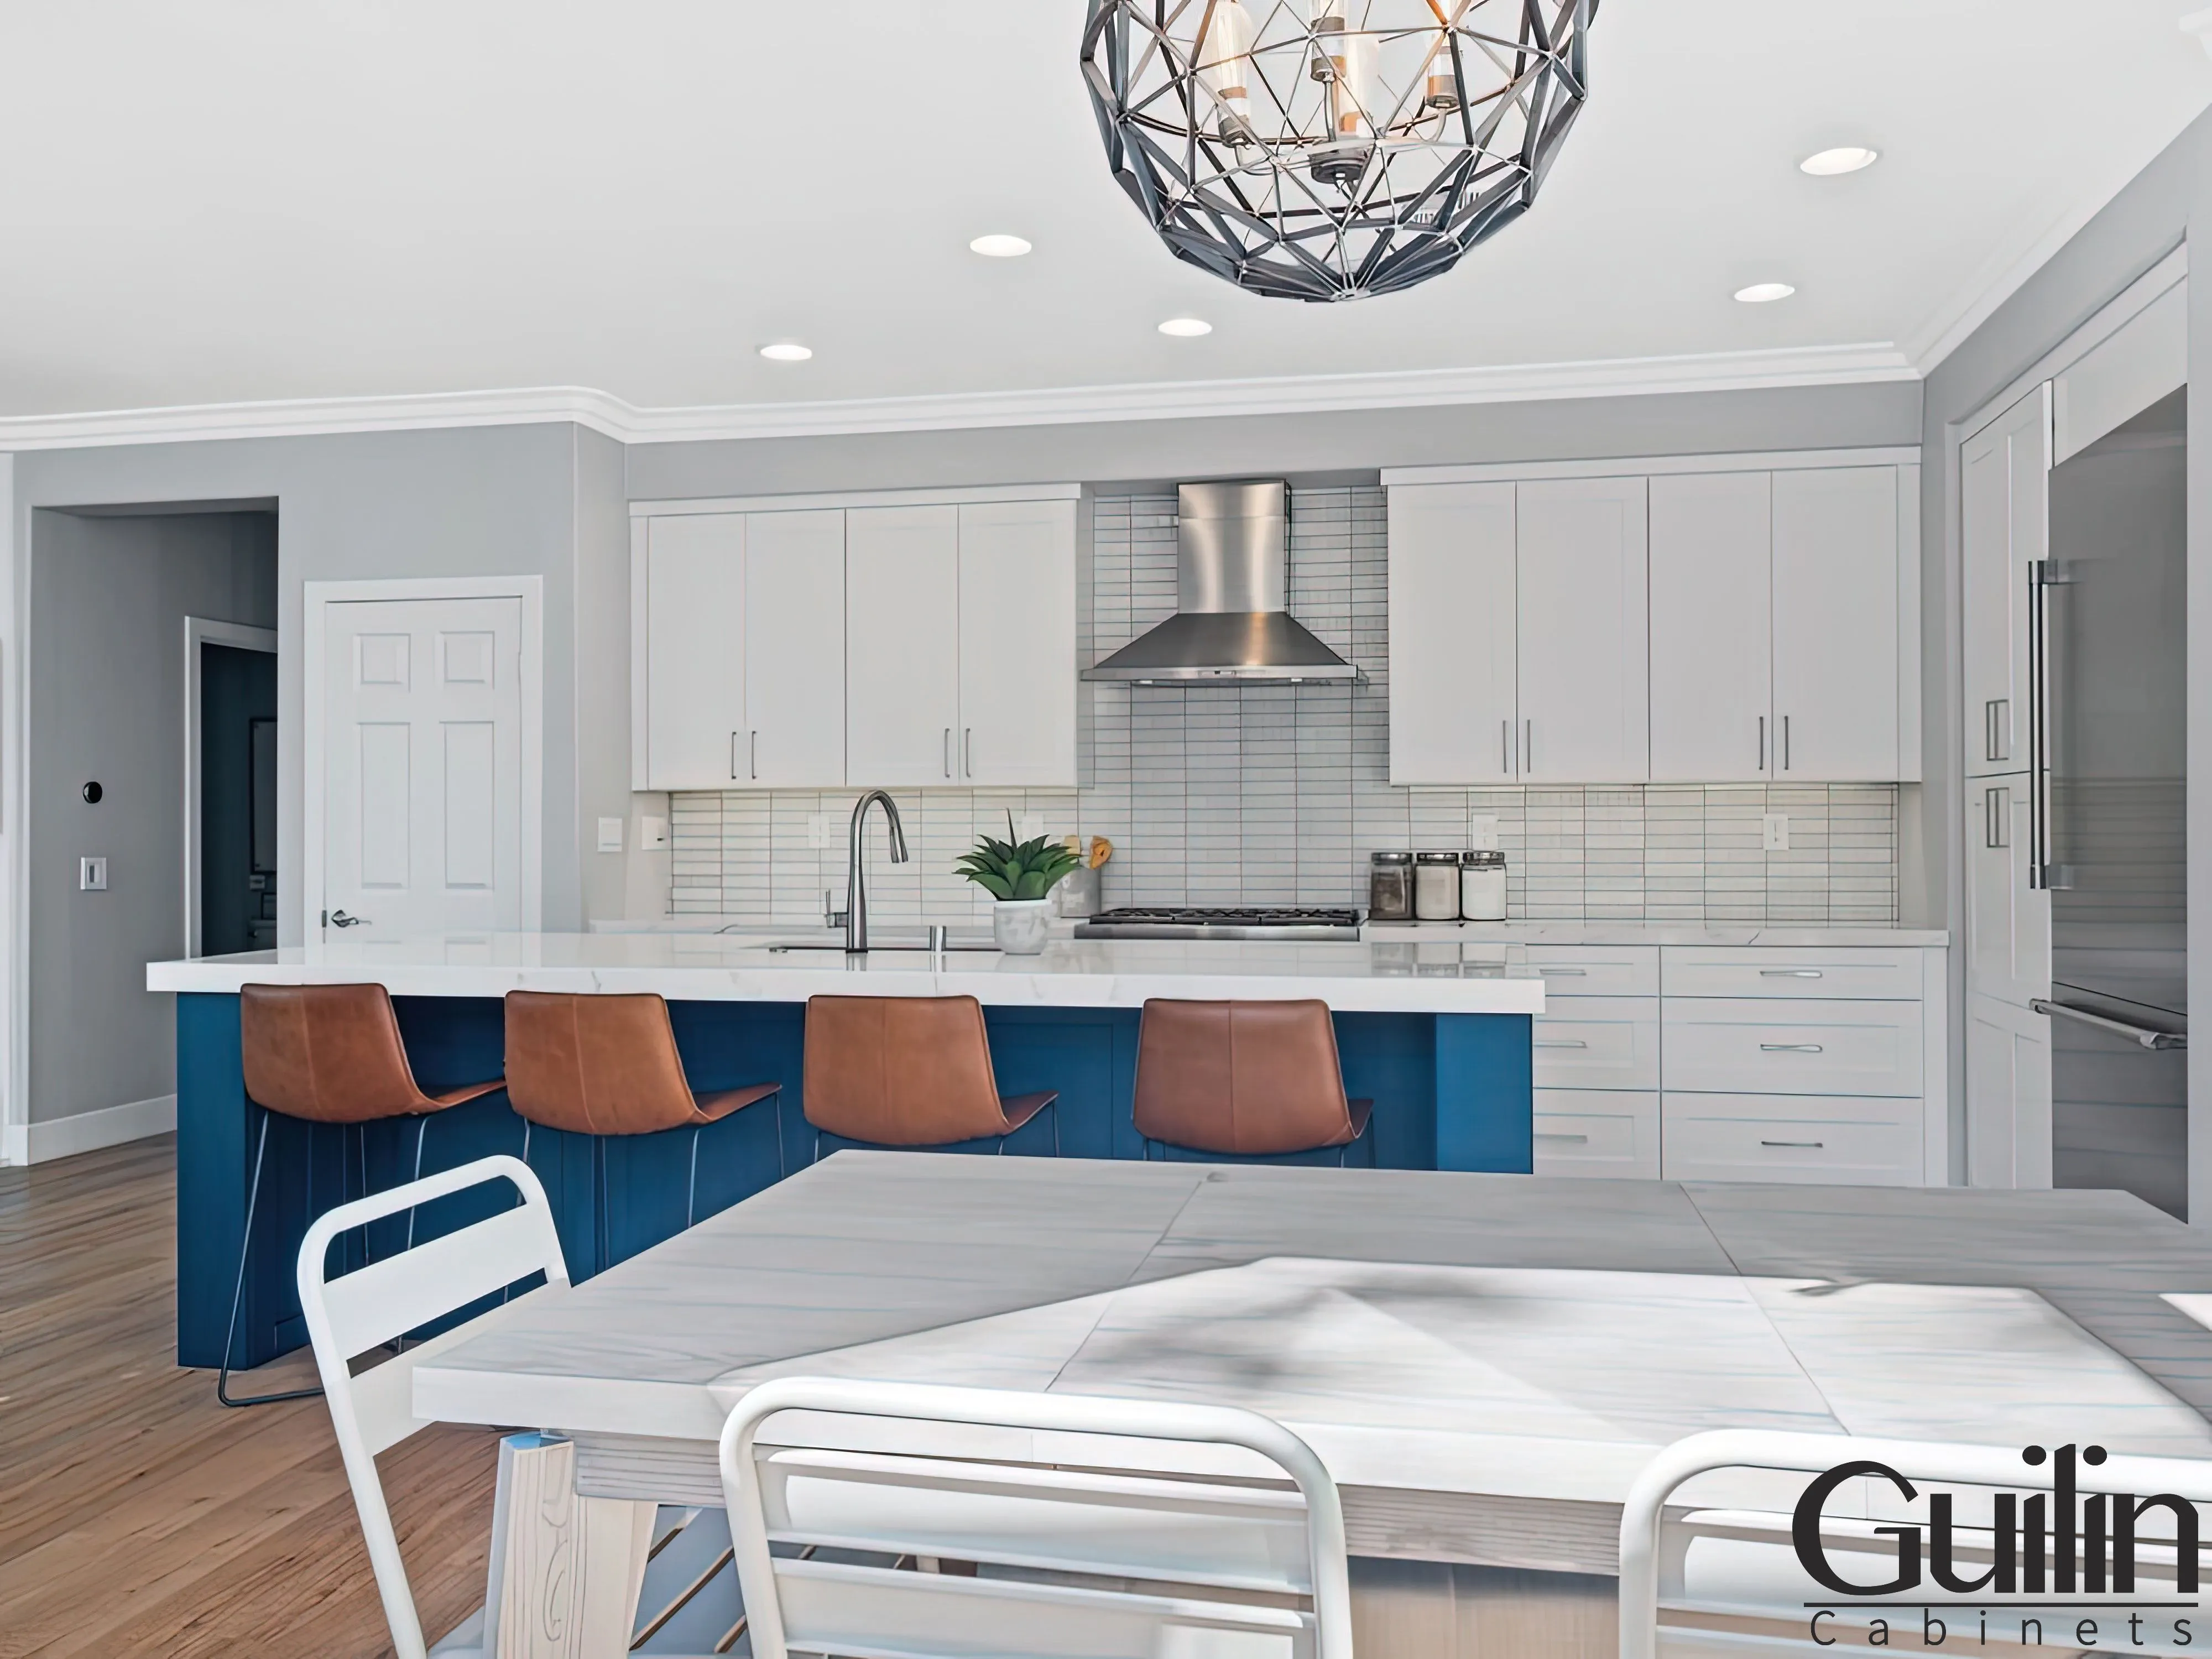 On top of that, white cabinets are timeless and will never go out of style in any kitchen.